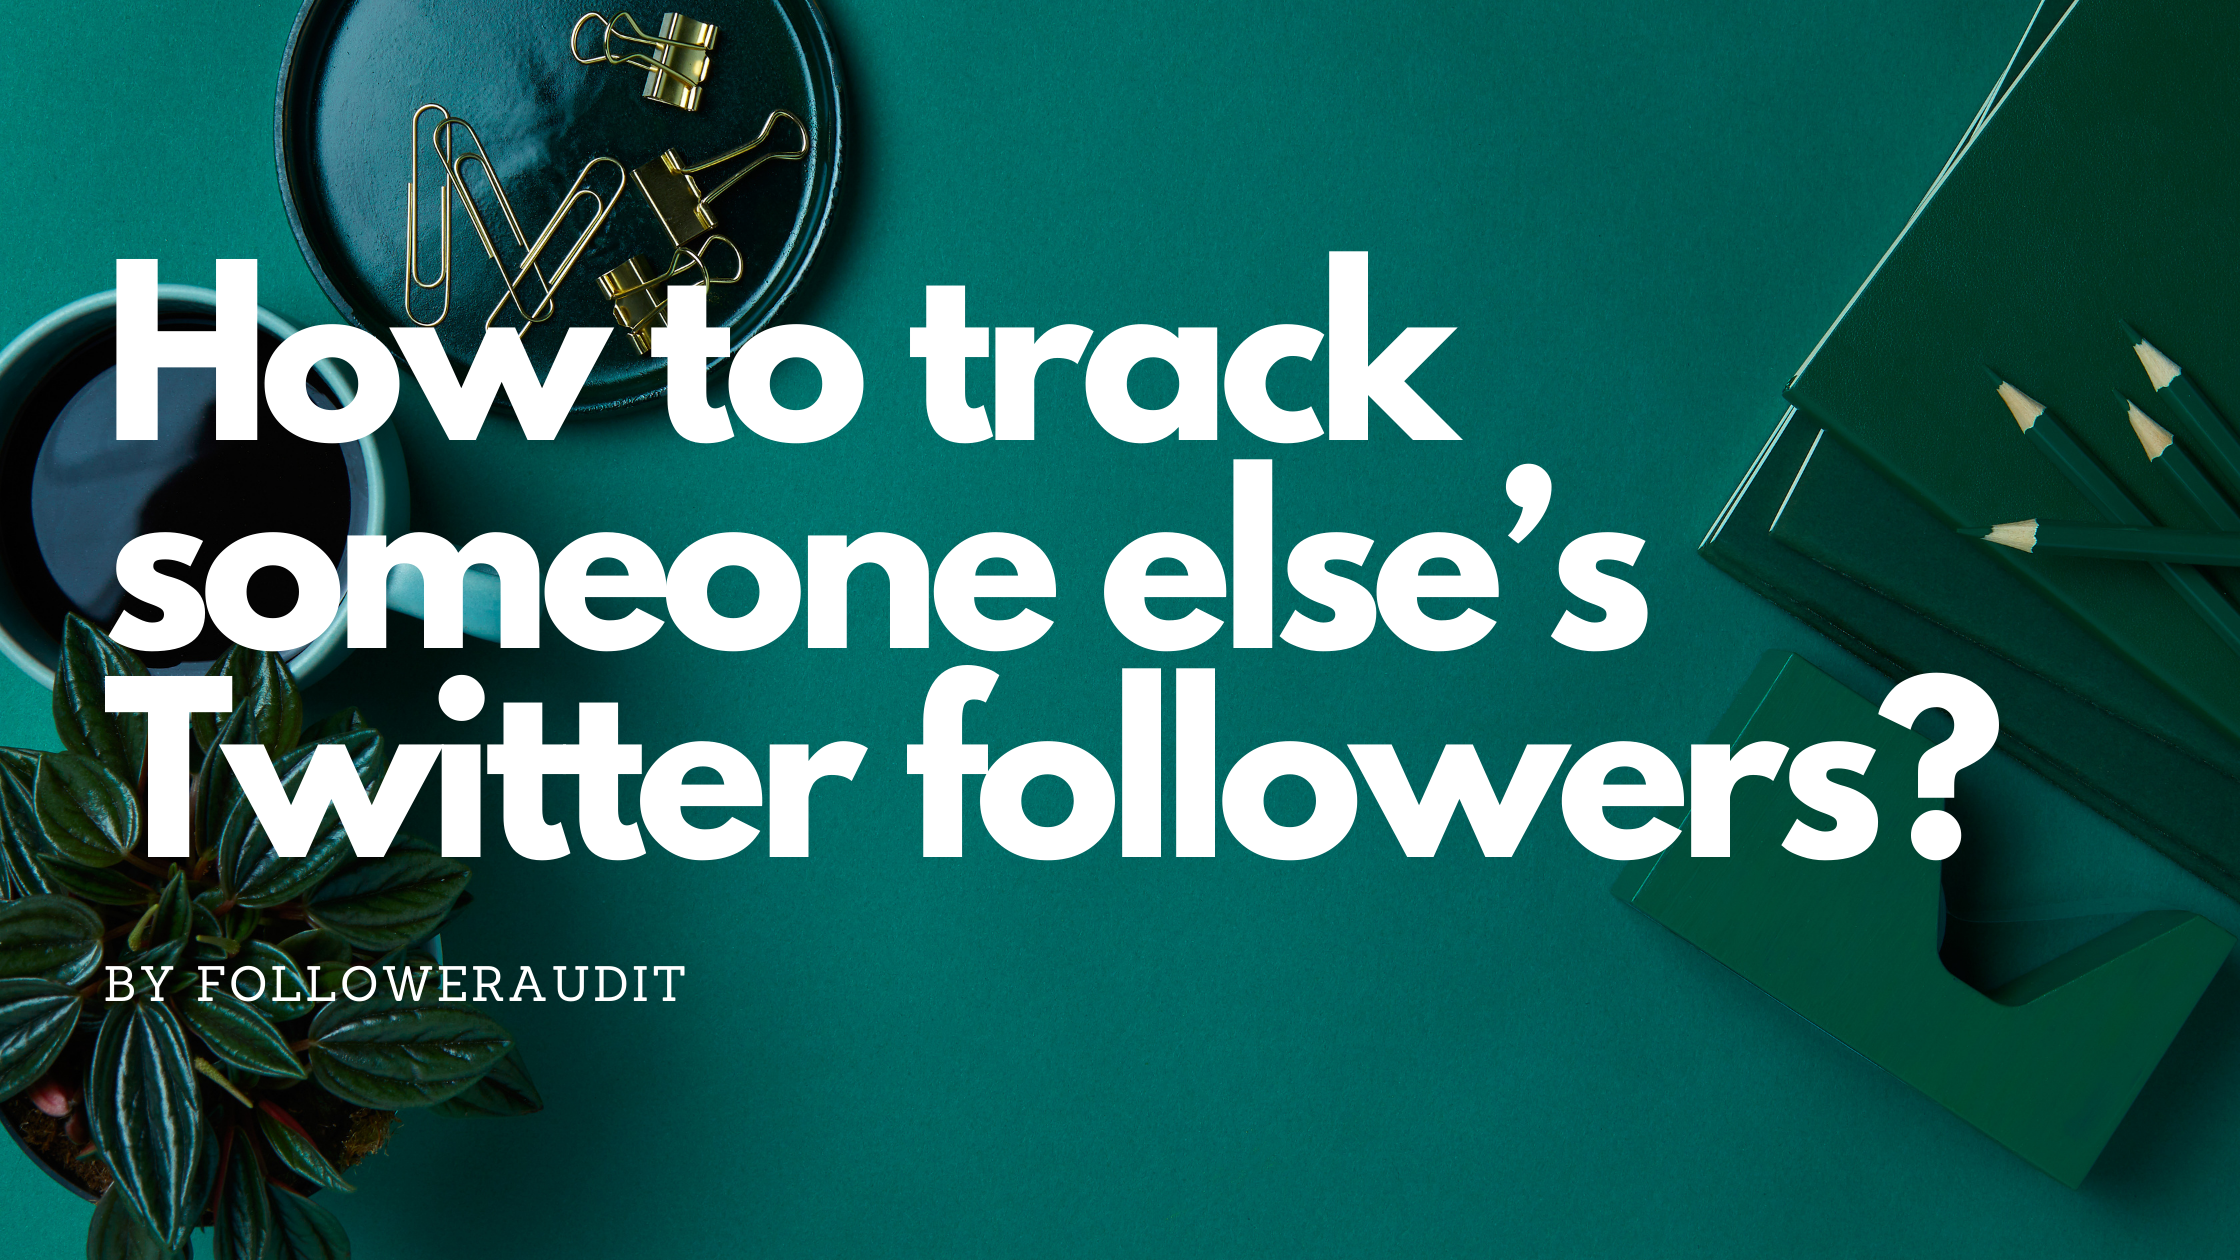 How to track someone else’s Twitter followers?